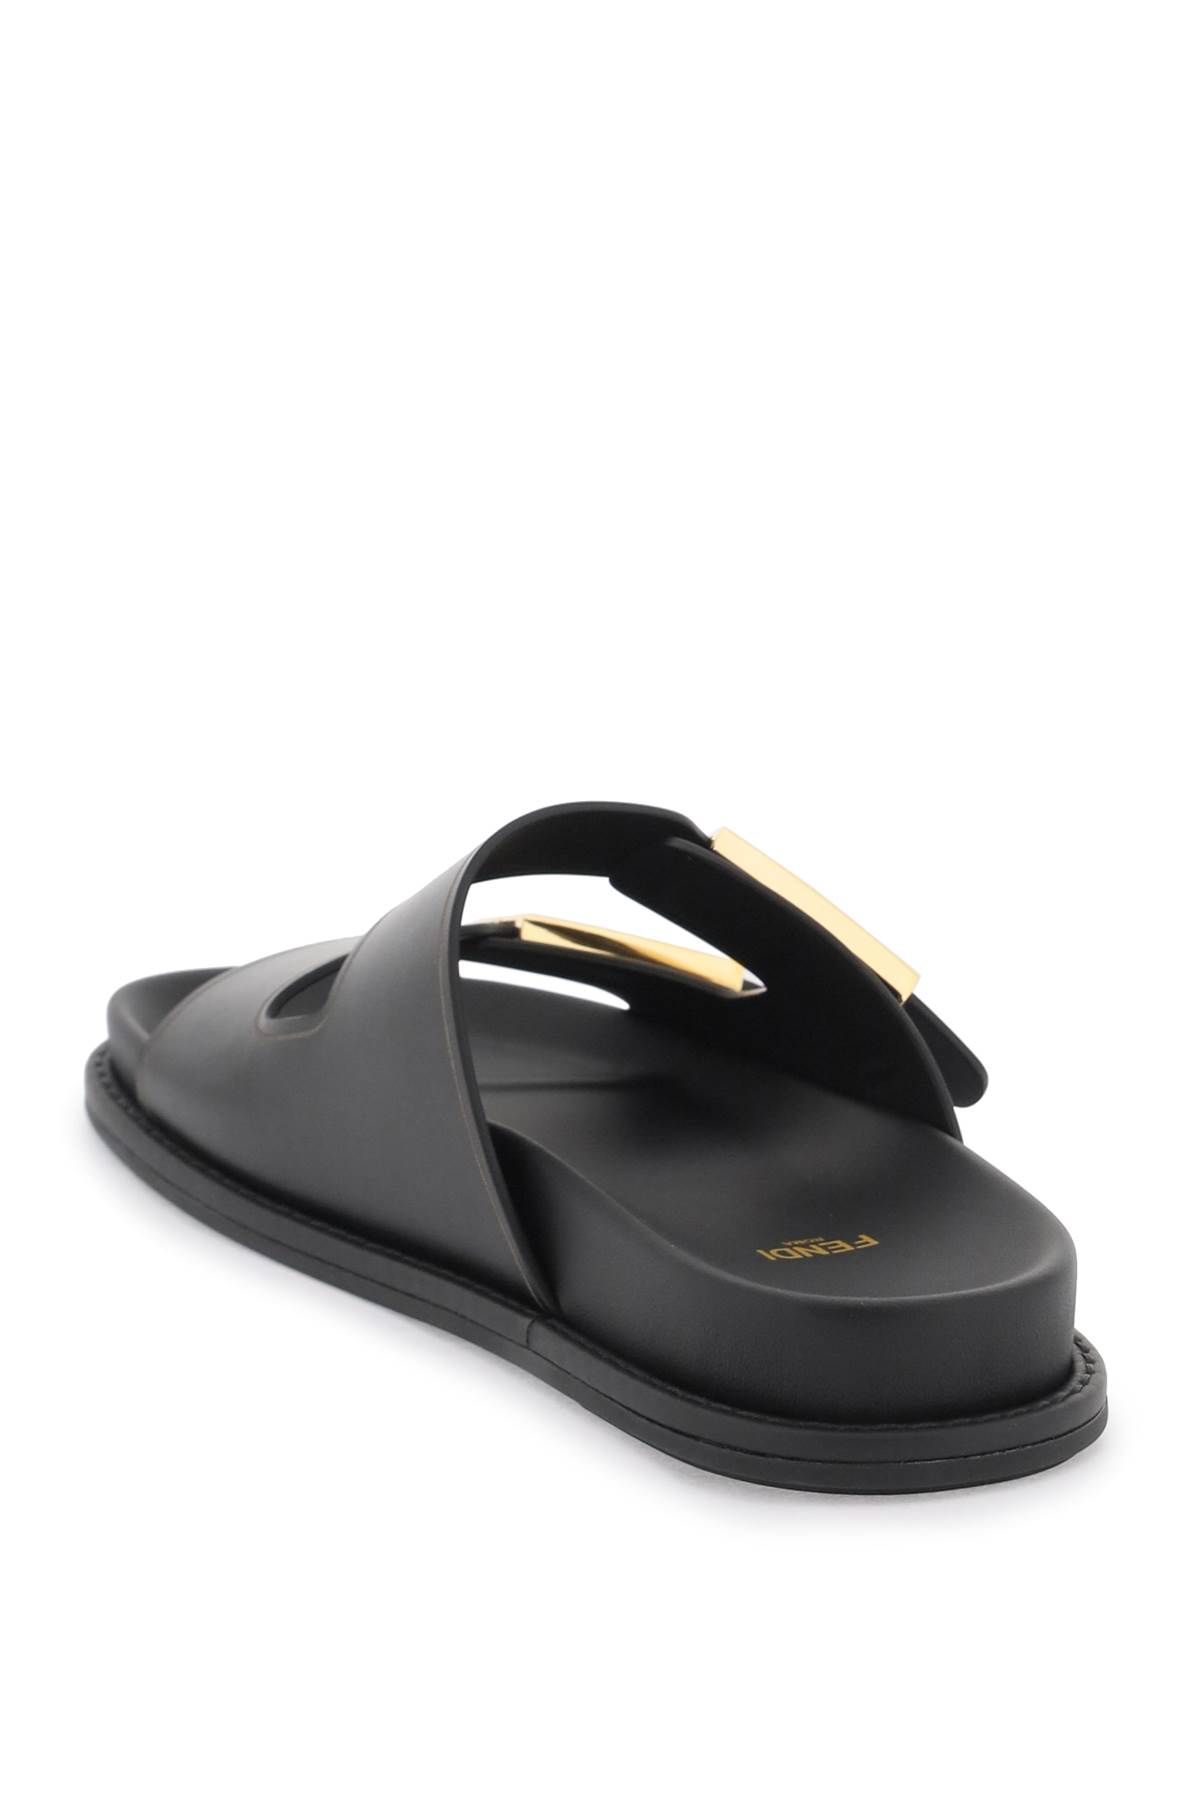 Shop Fendi Leather Slides With A Luxurious In Black